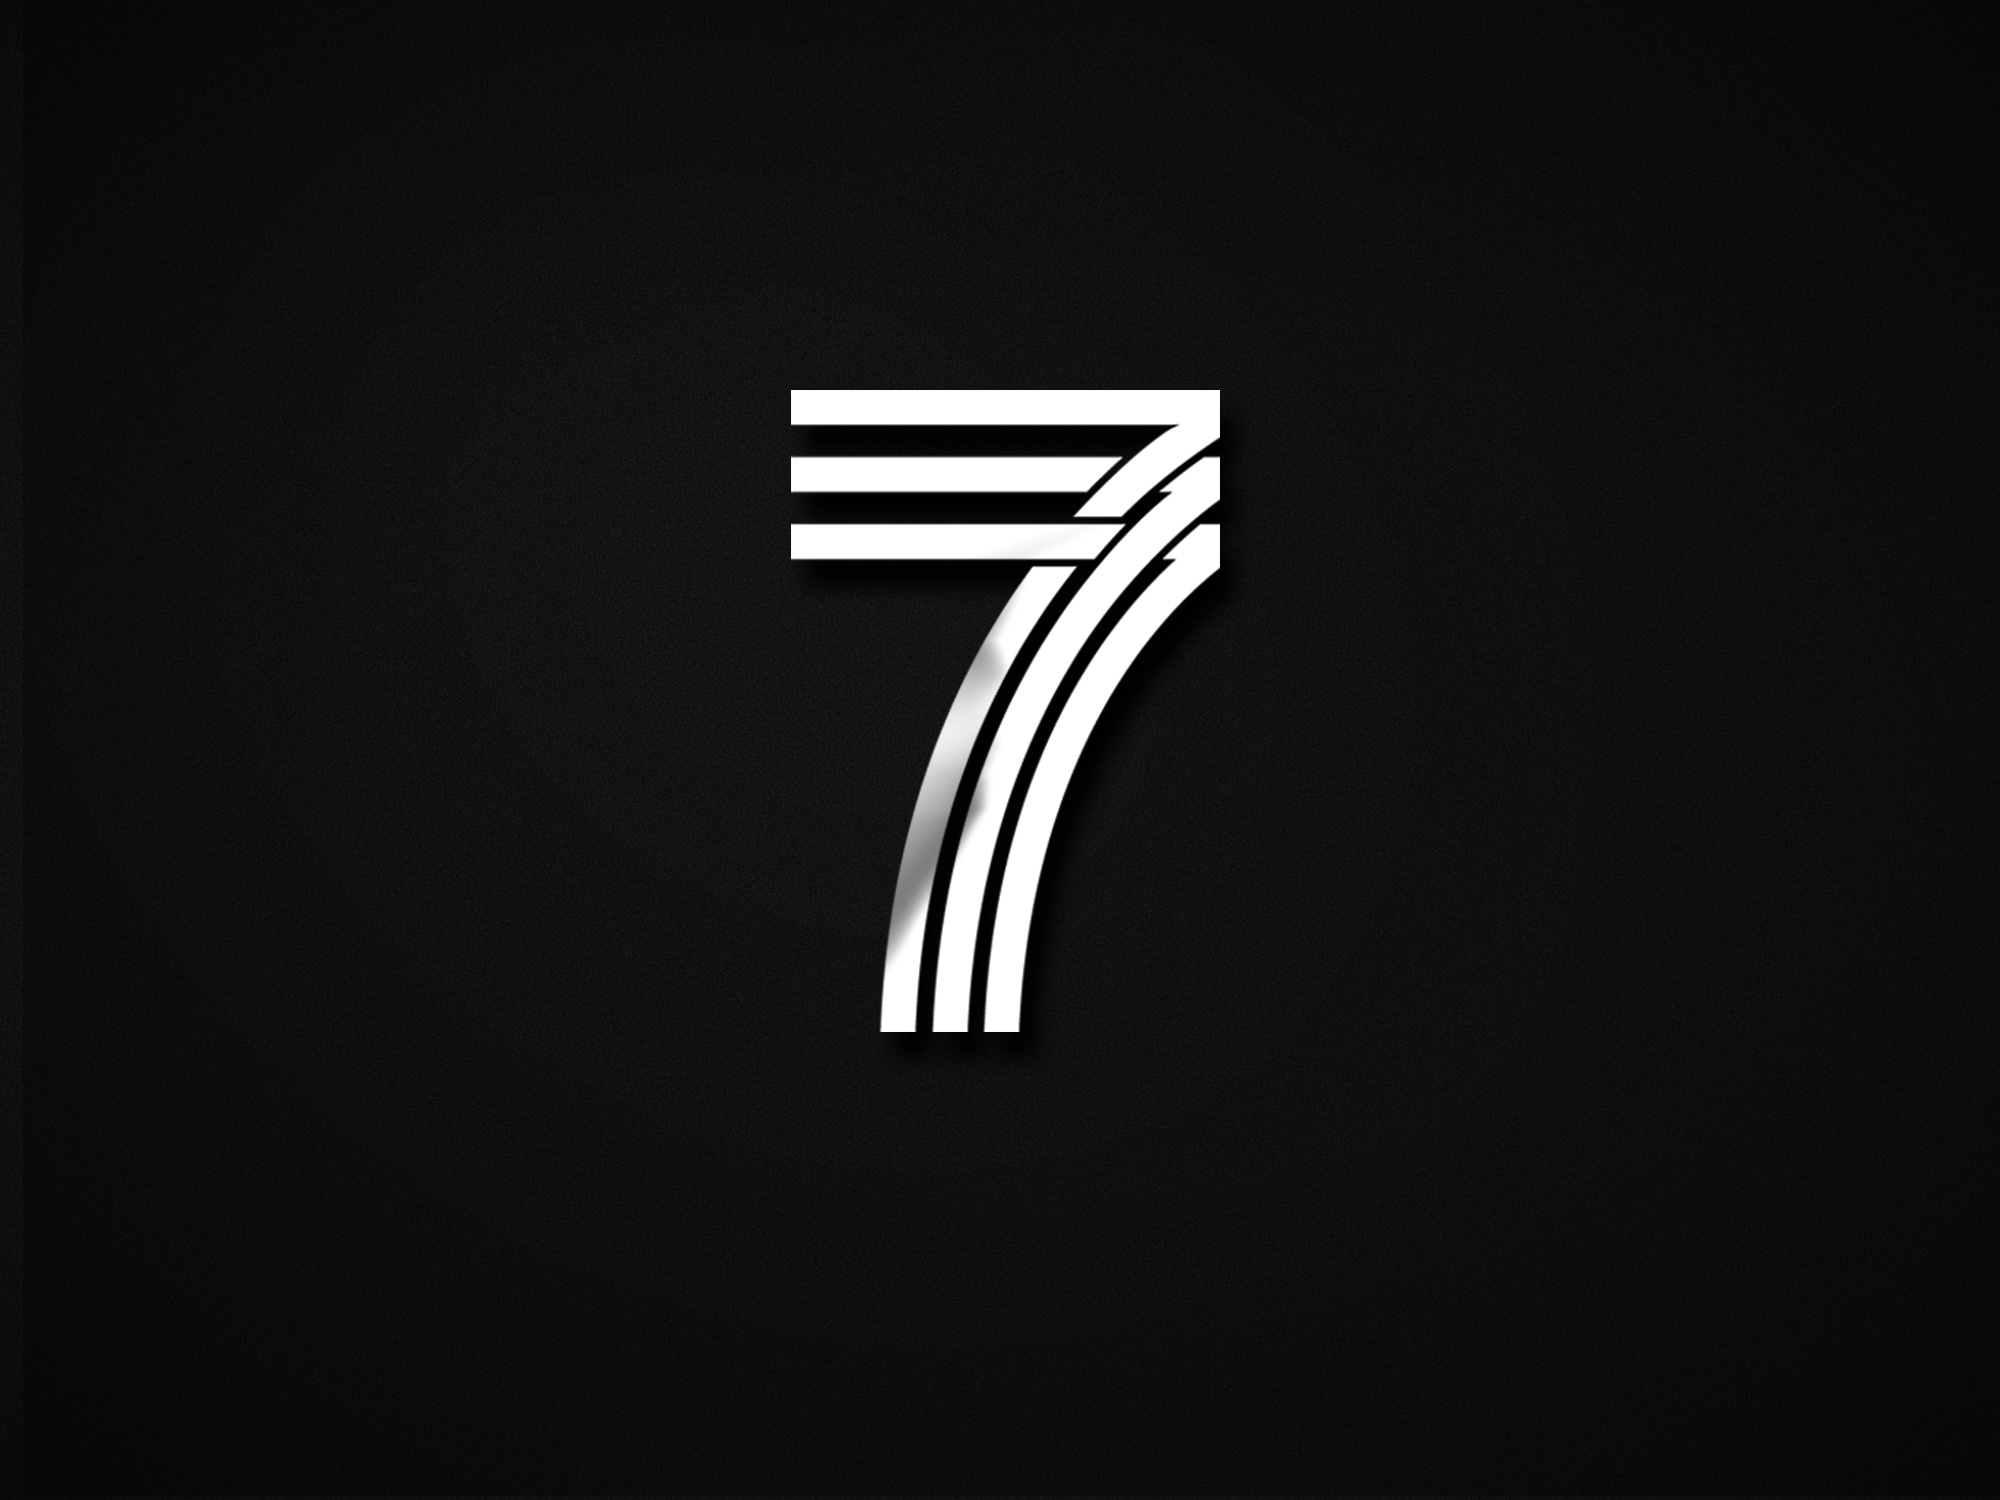 Number 7 designs, themes, templates and downloadable graphic elements on  Dribbble